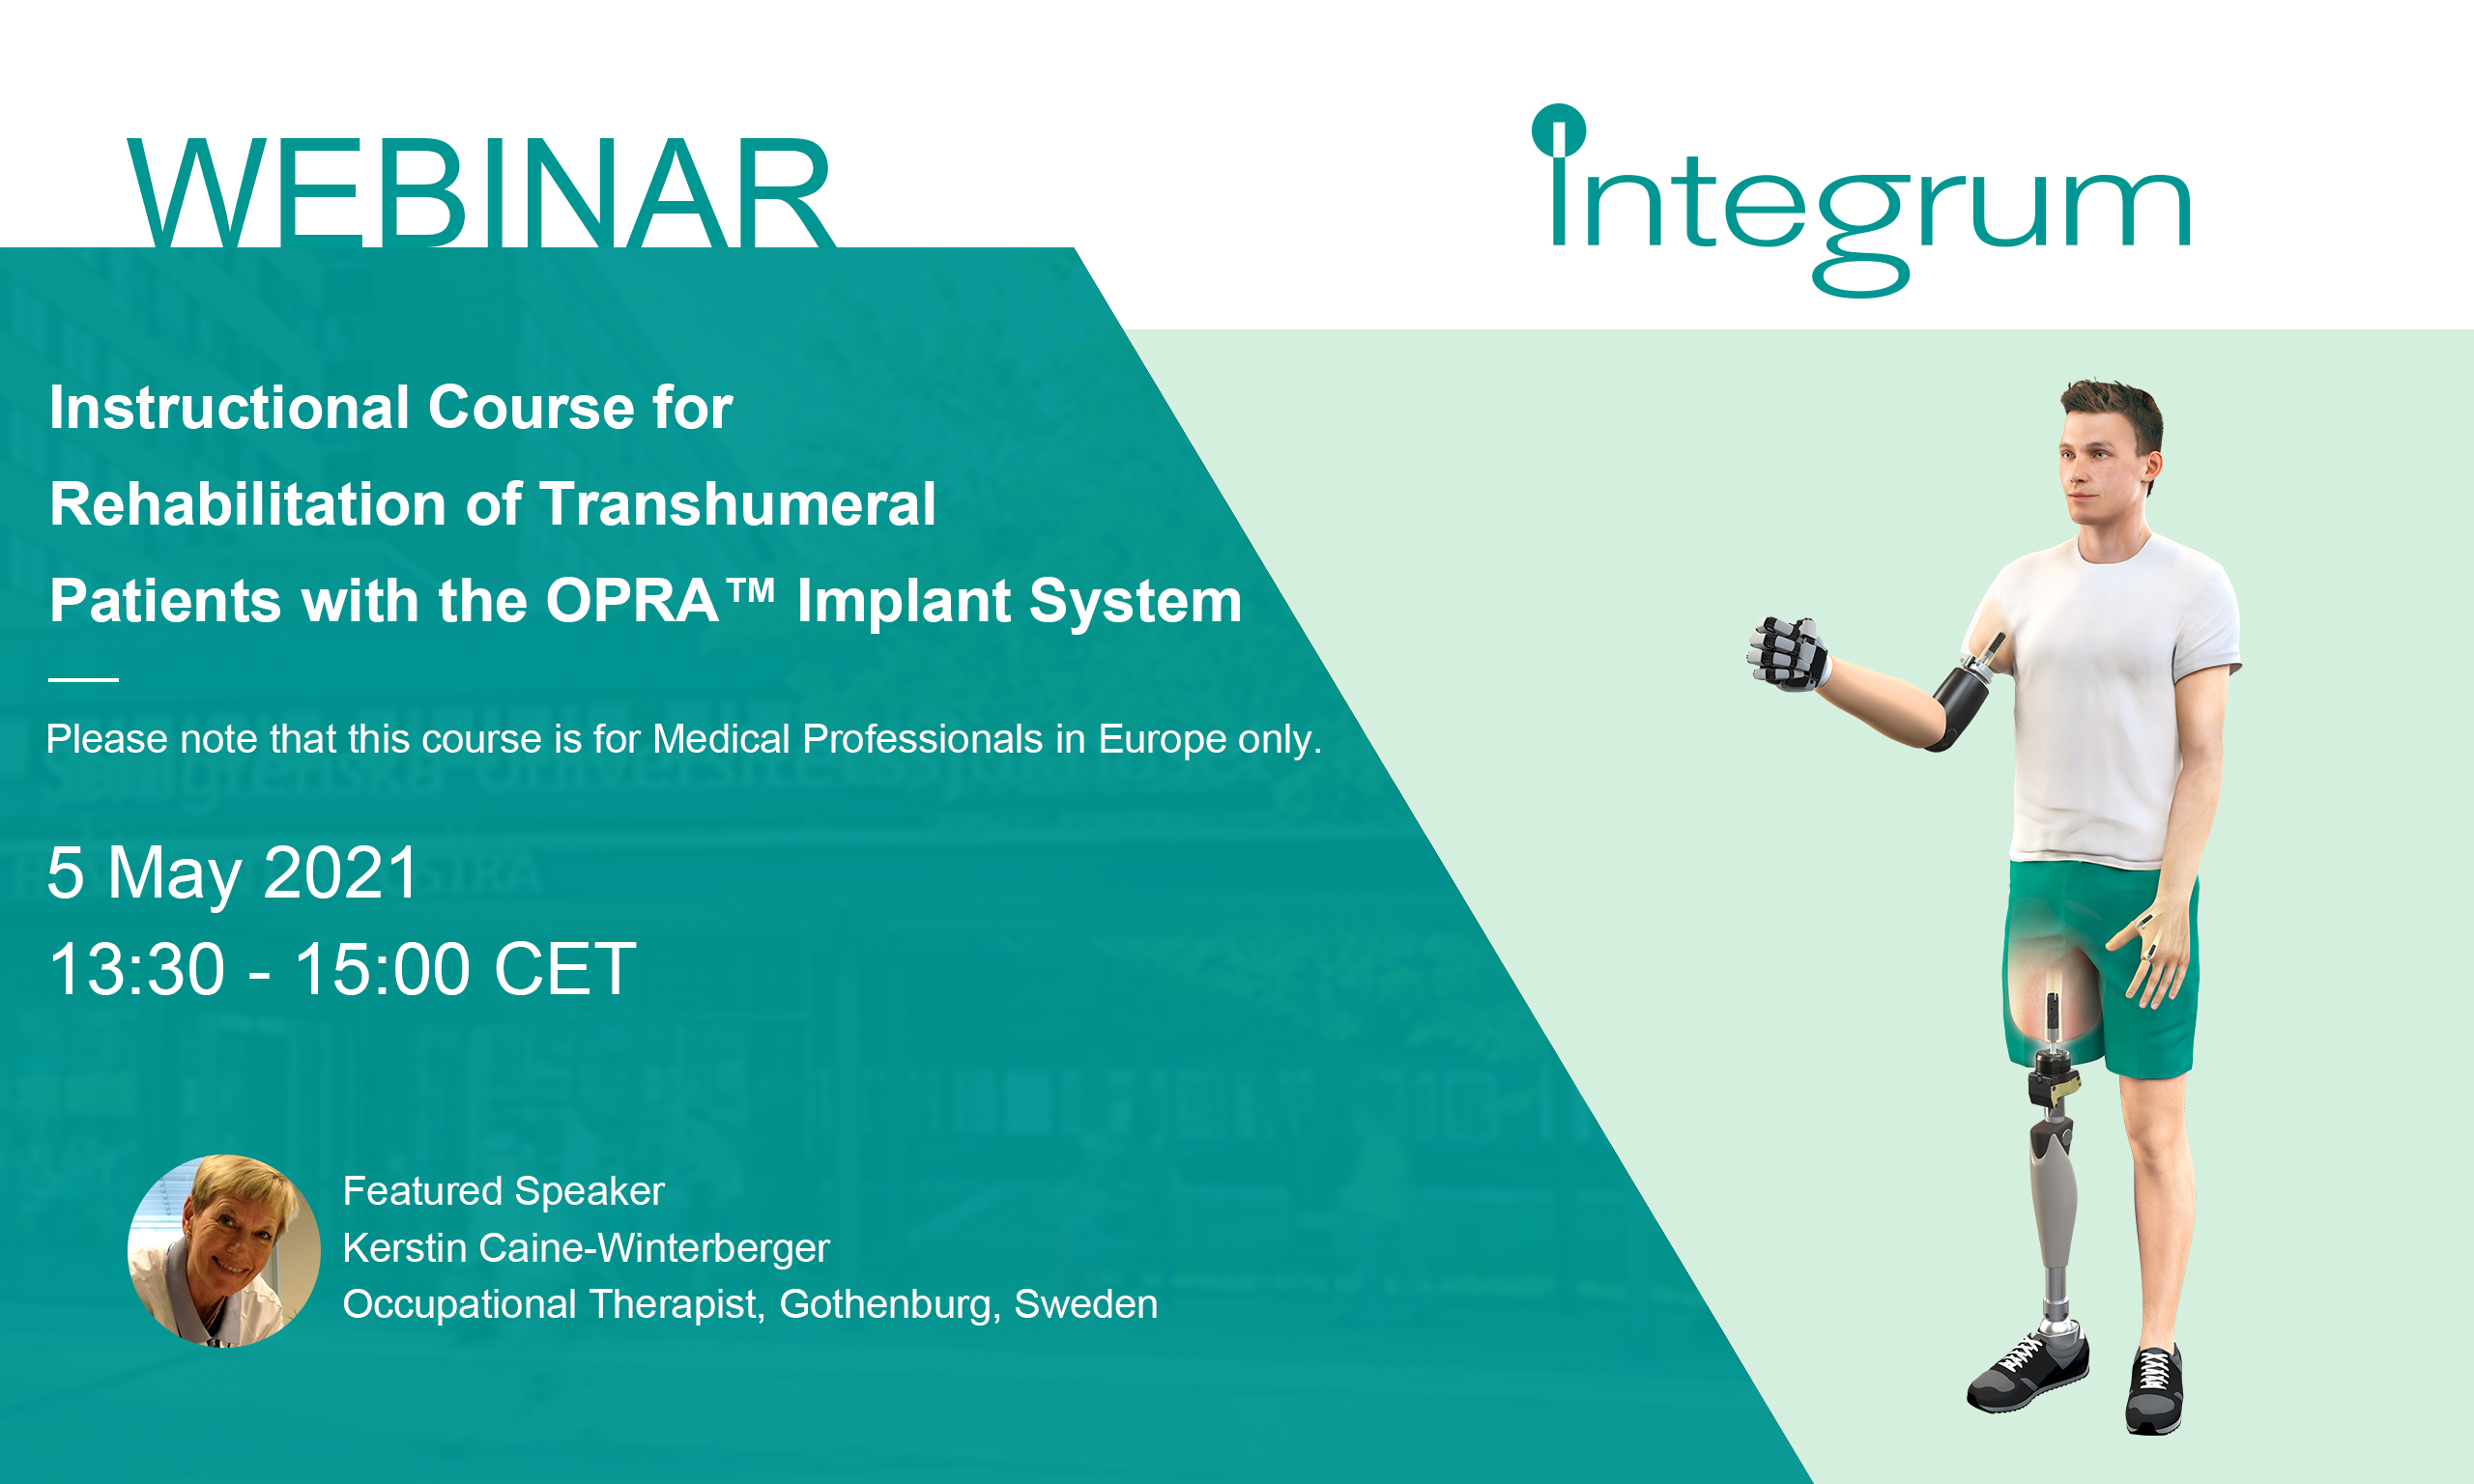 Instructional Course for Rehabilitation of Transhumeral Patients with the OPRA™ Implant System